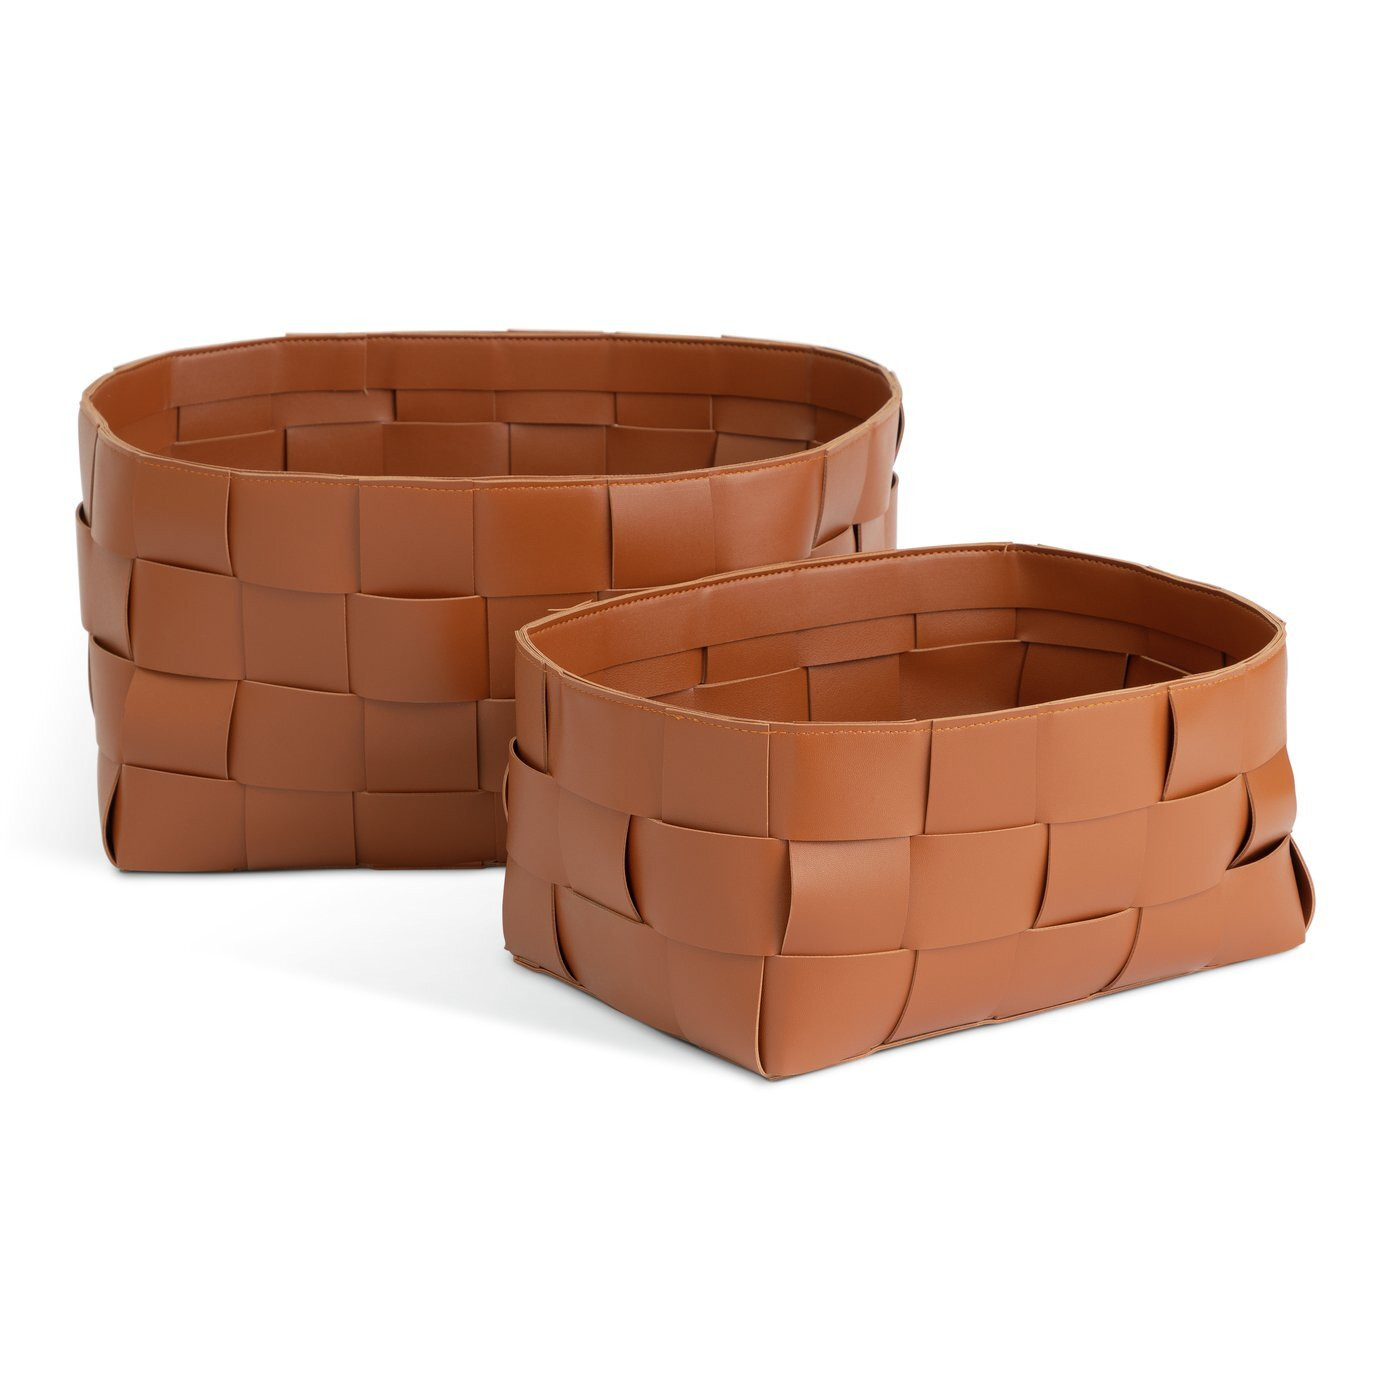 Habitat Recycled Faux Leather Set of 2 Baskets - Brown - image 1